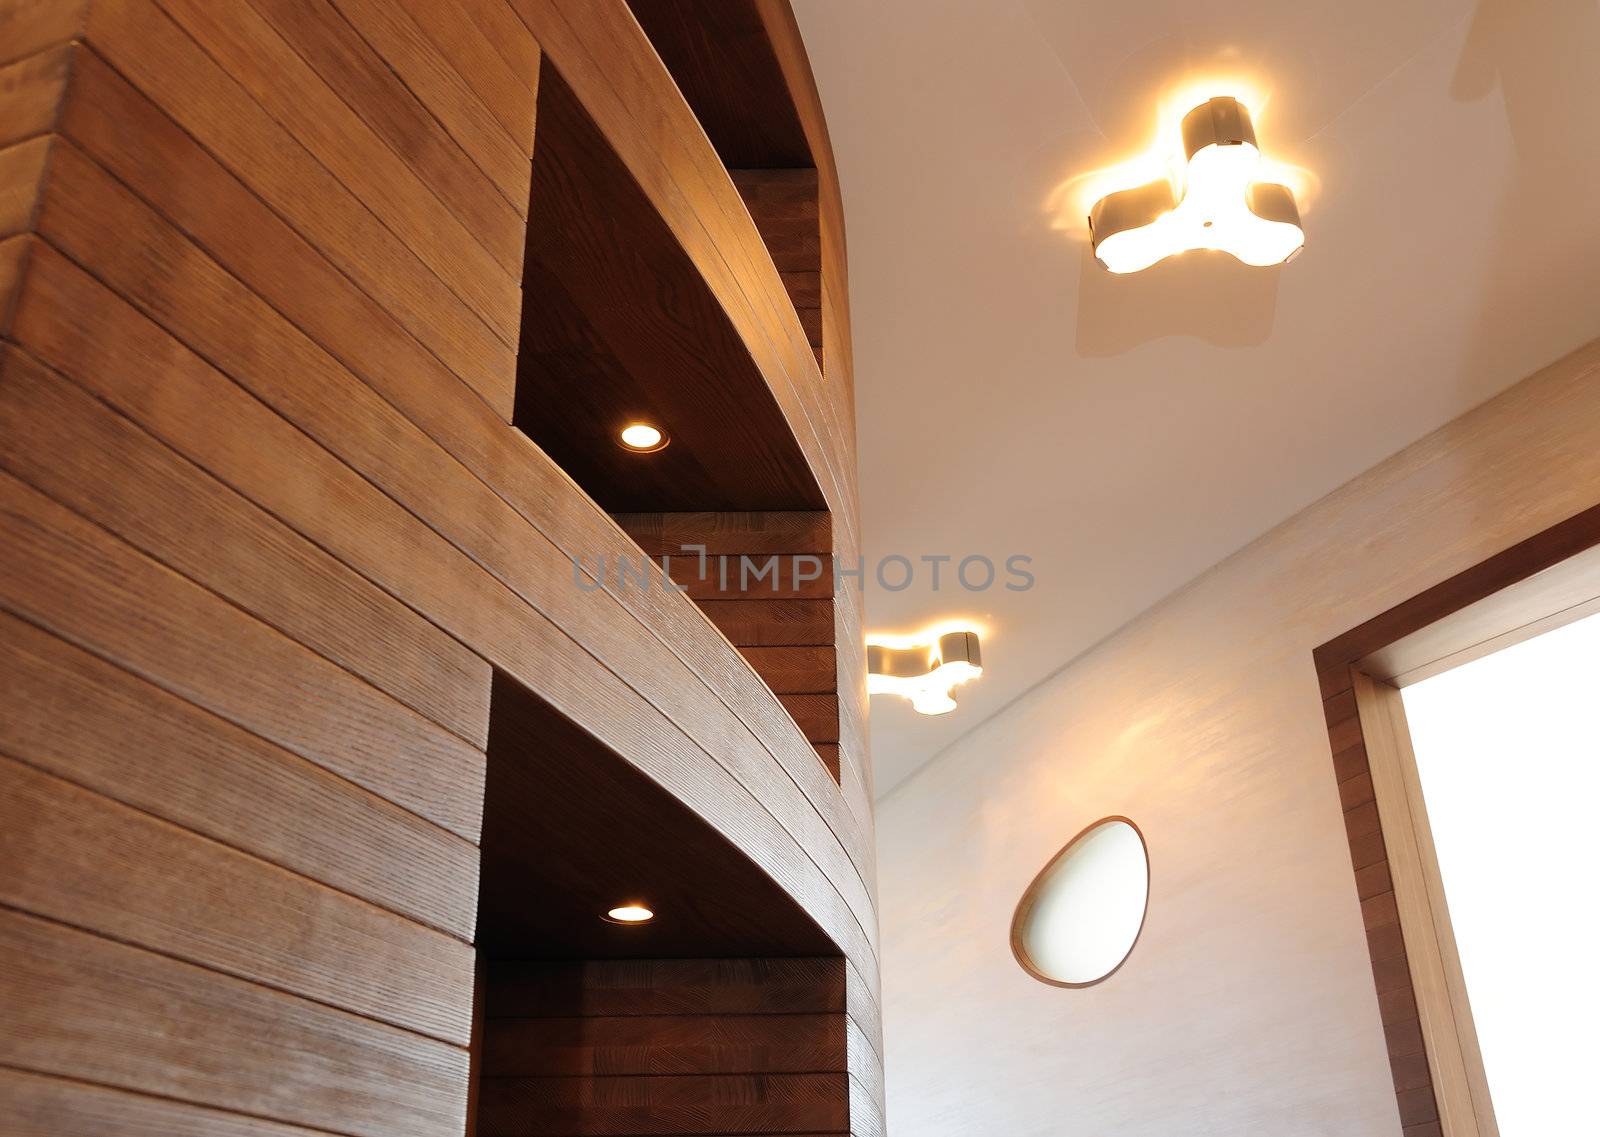 Wooden cabinet with light in the interior